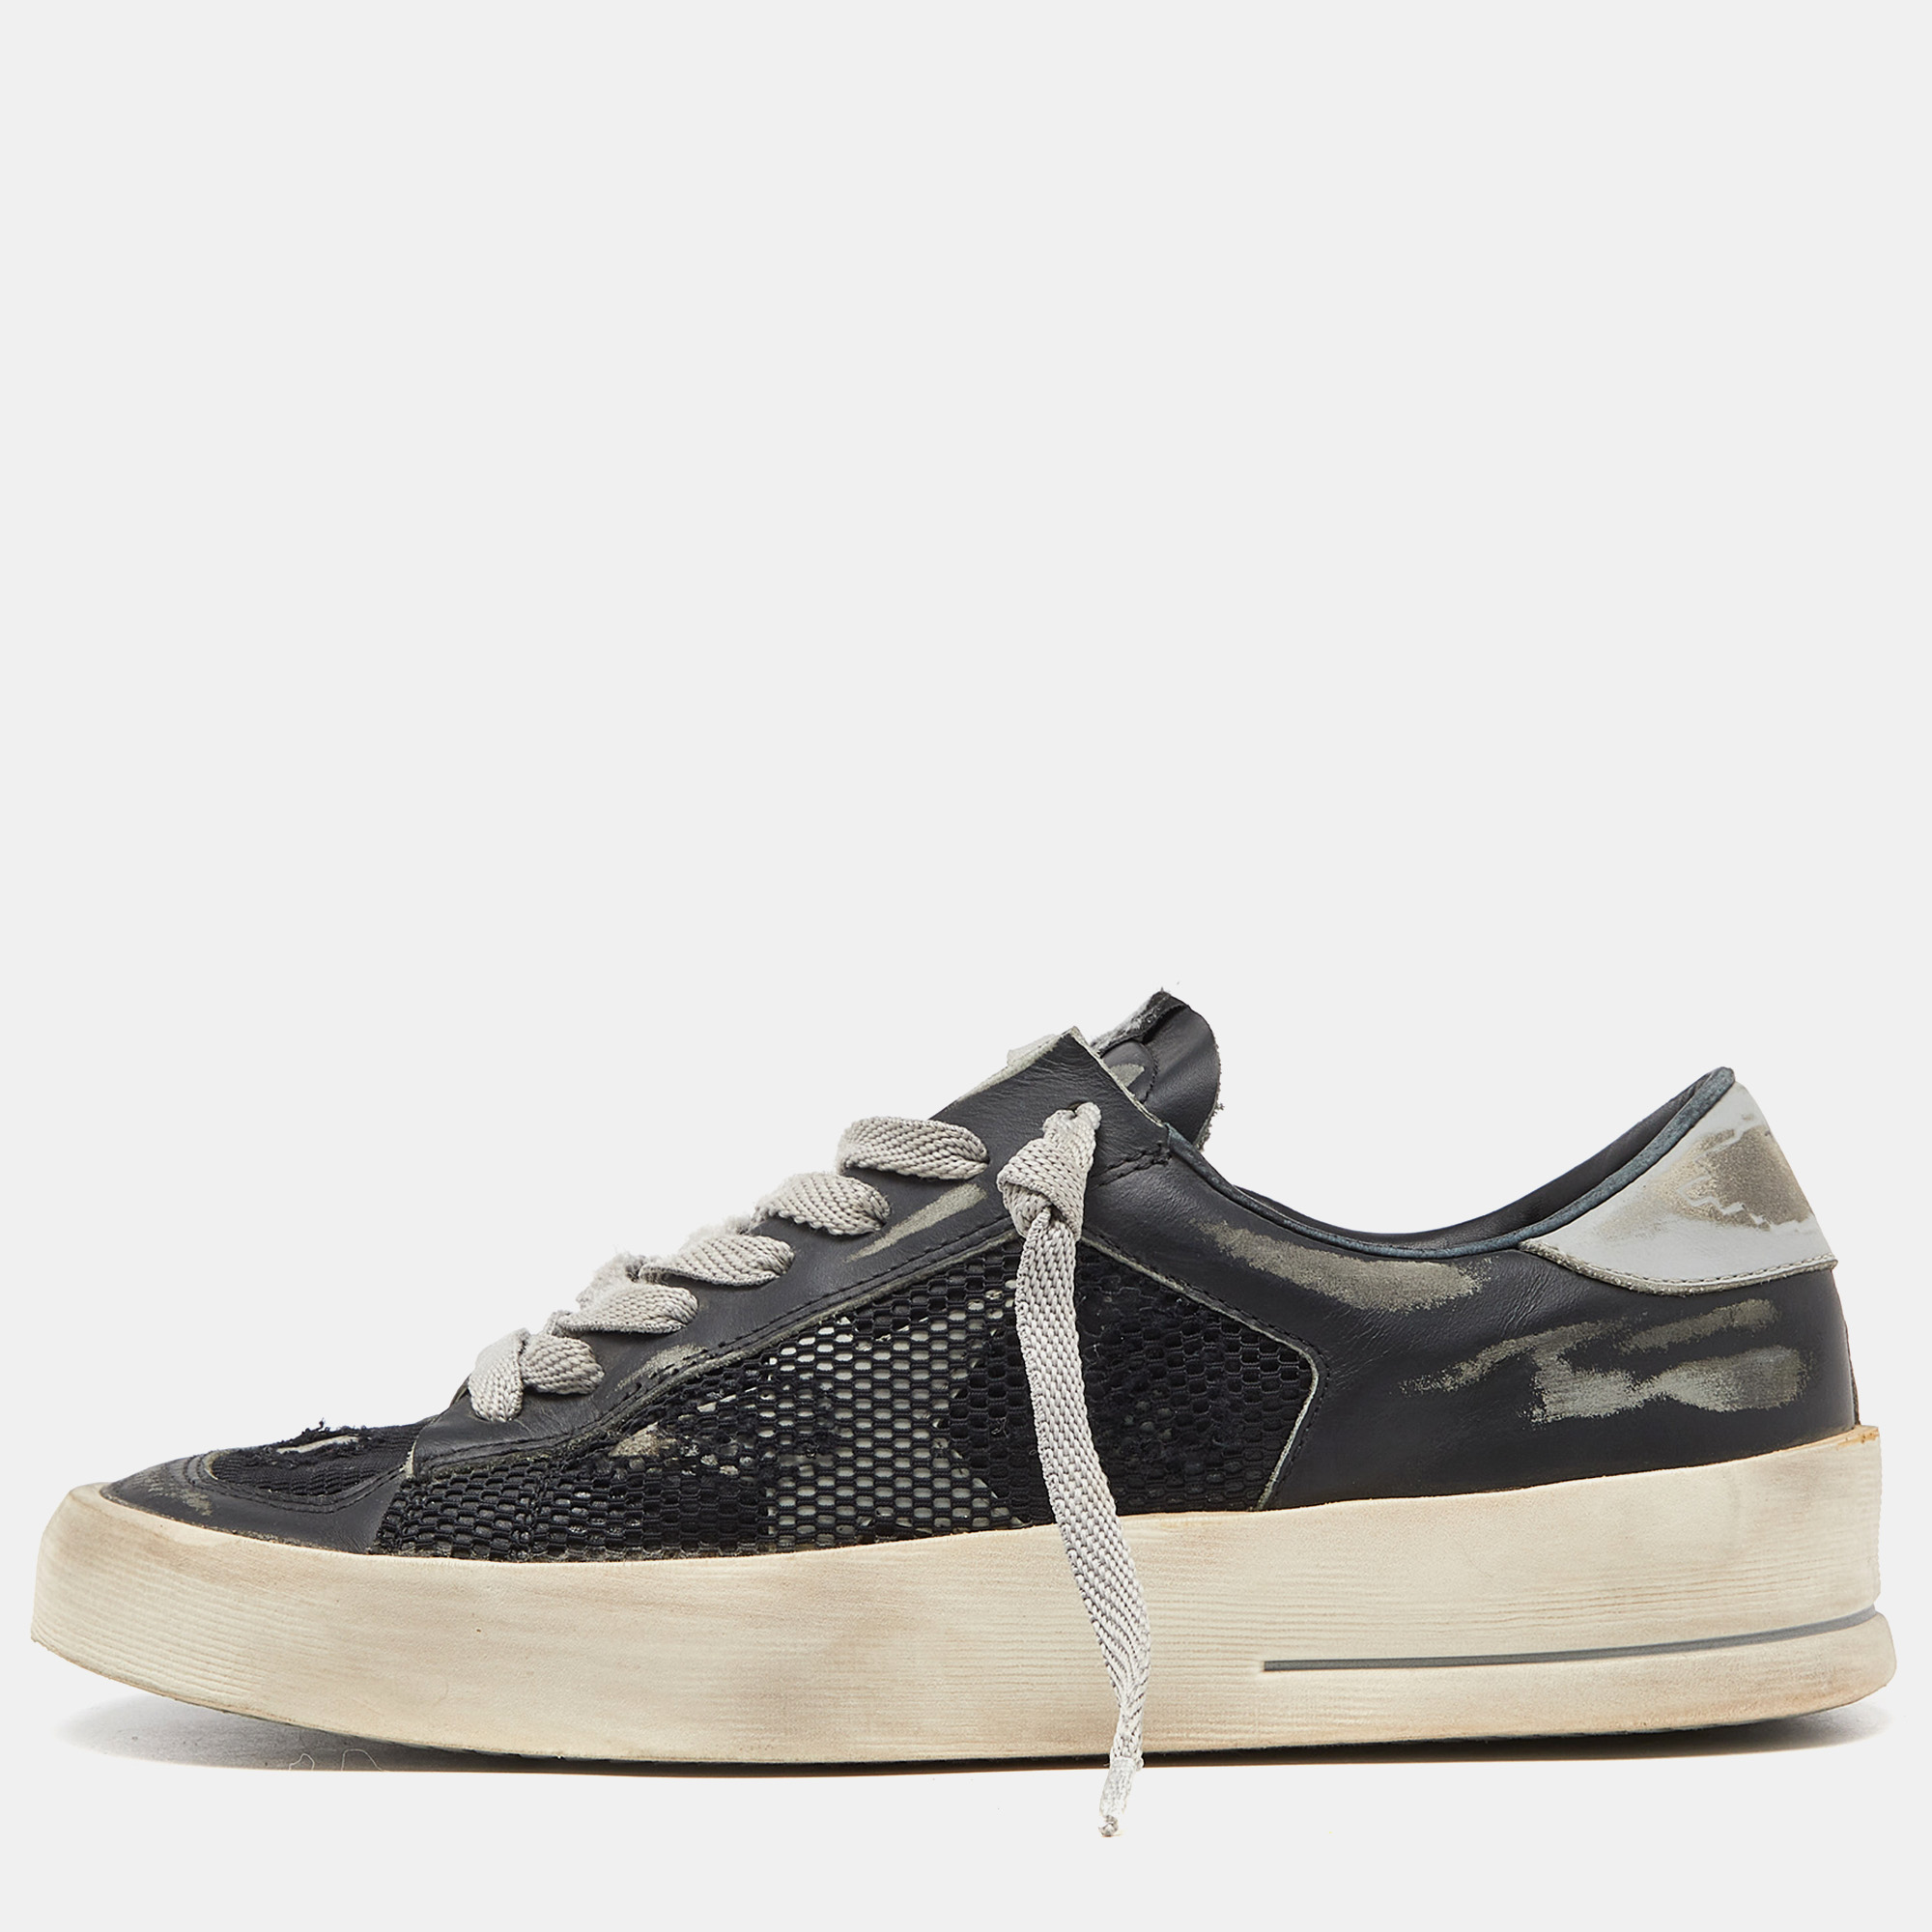 

Golden Goose Black/Grey Leather and Mesh Stardan Low Top Sneakers Size